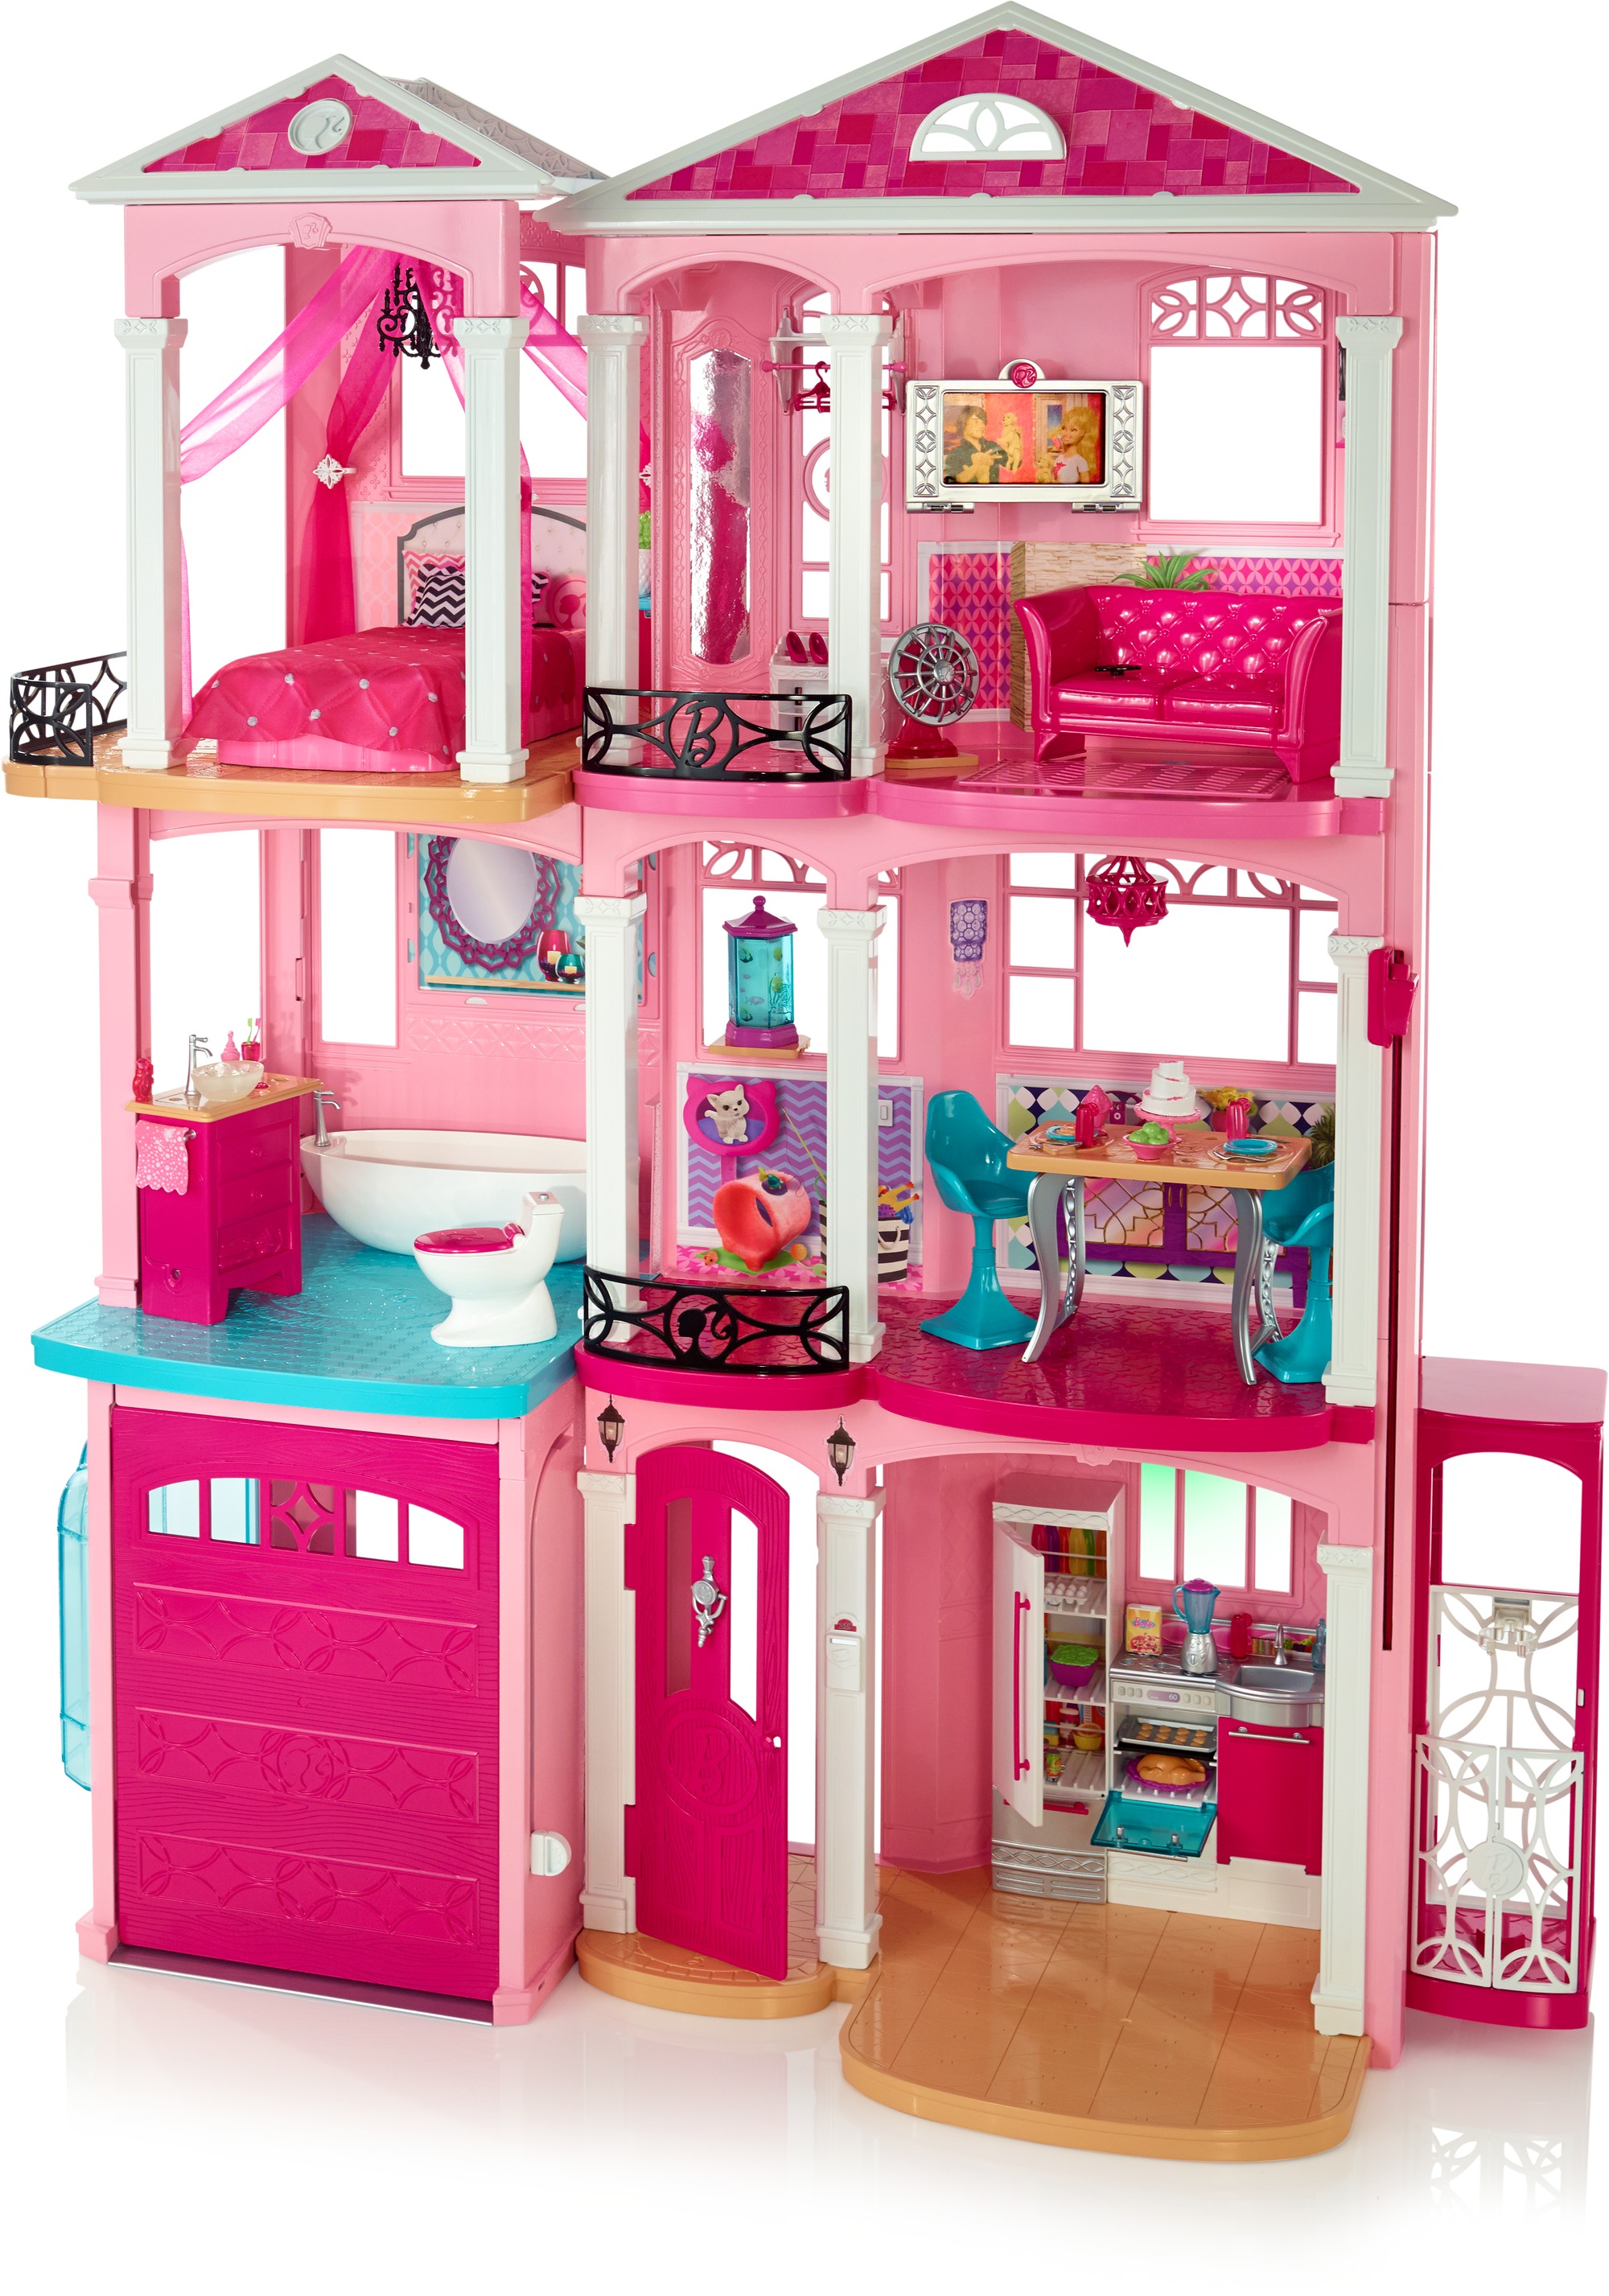 Barbie Estate DreamHouse Playset with 70+ Accessory Pieces - image 1 of 6